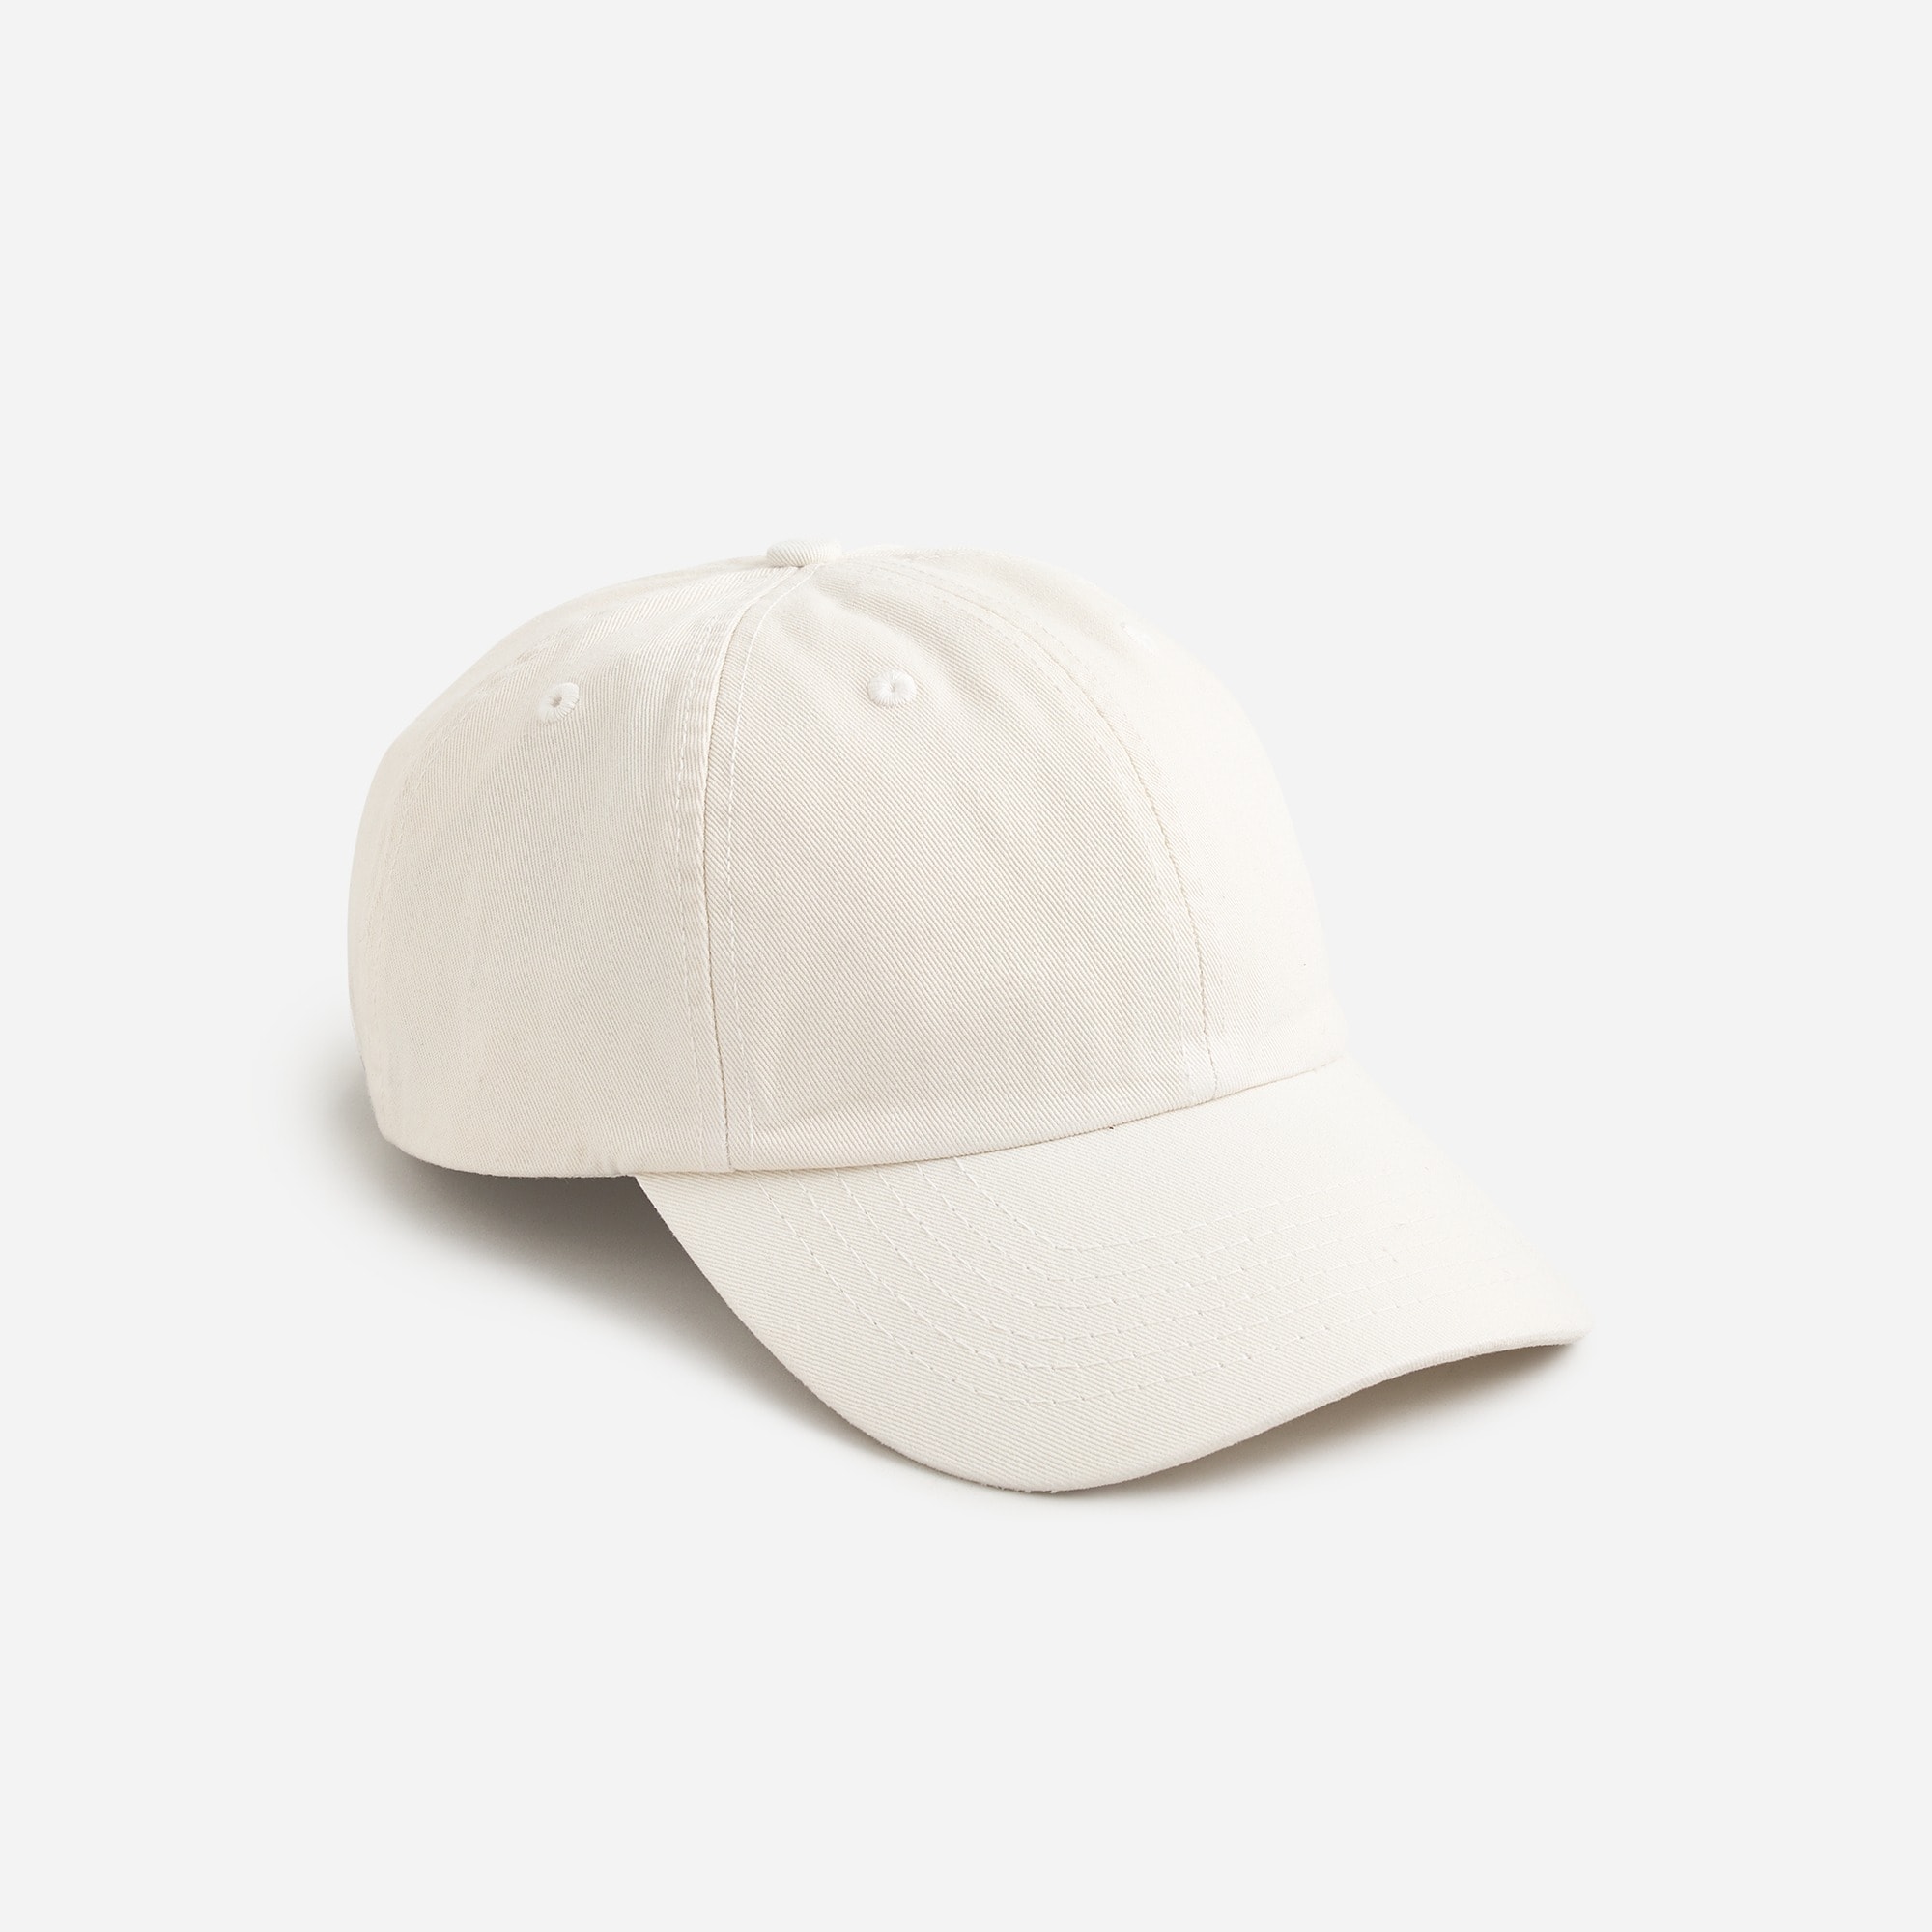  Made-in-the-USA garment-dyed twill baseball cap